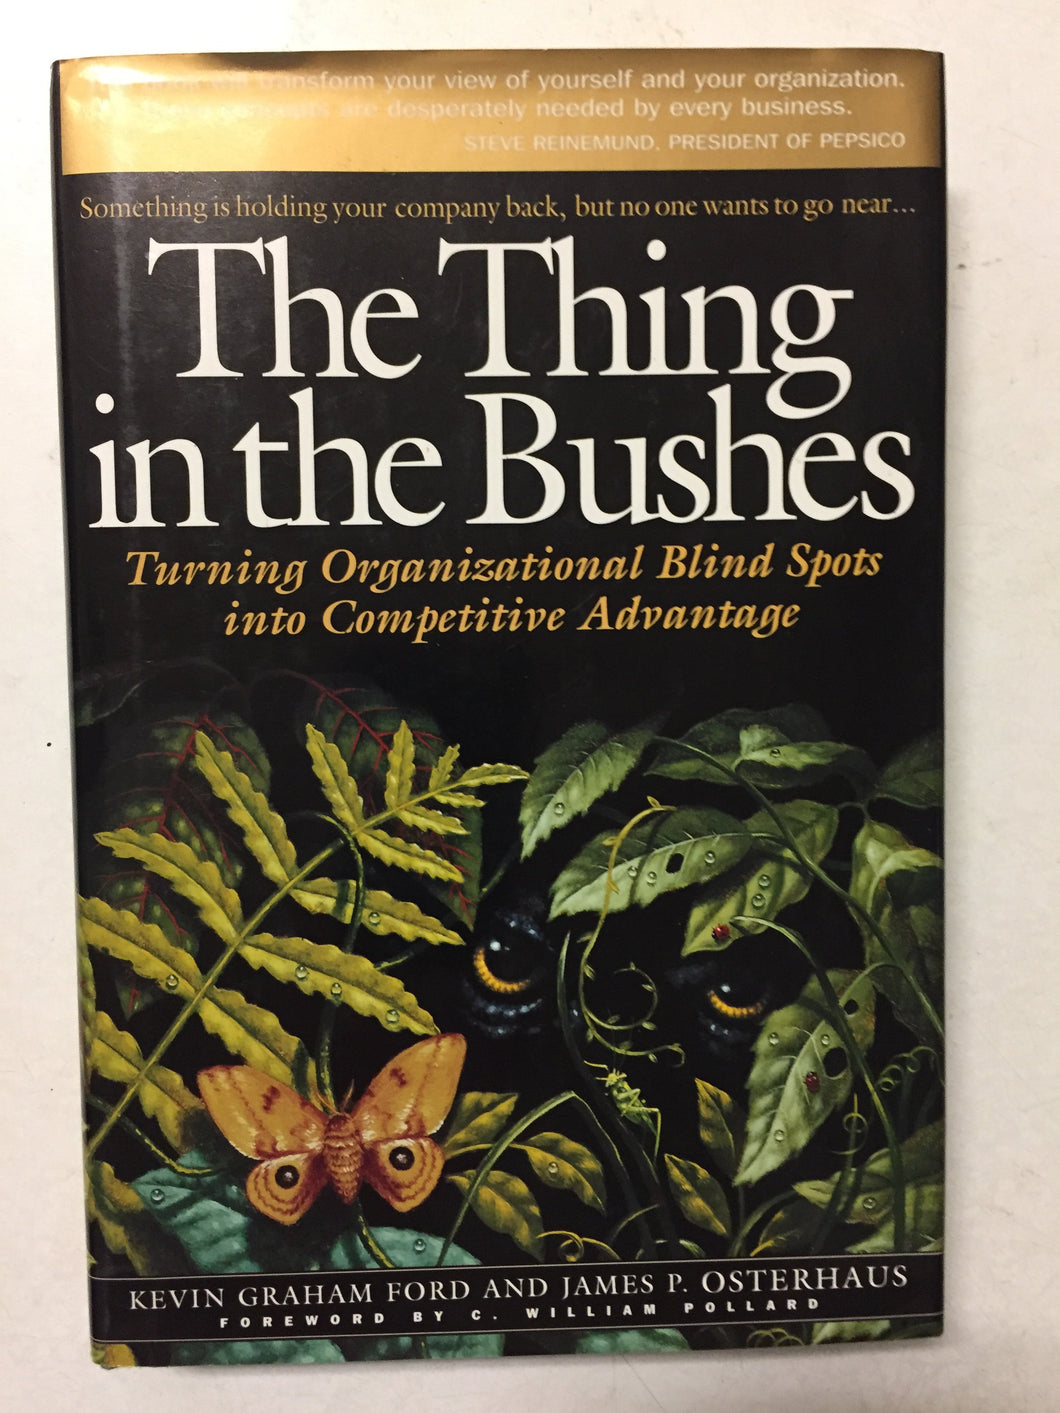 The Thing in the Bushes Turning Organizational Blind Spots into Competitive Advantage - Slickcatbooks